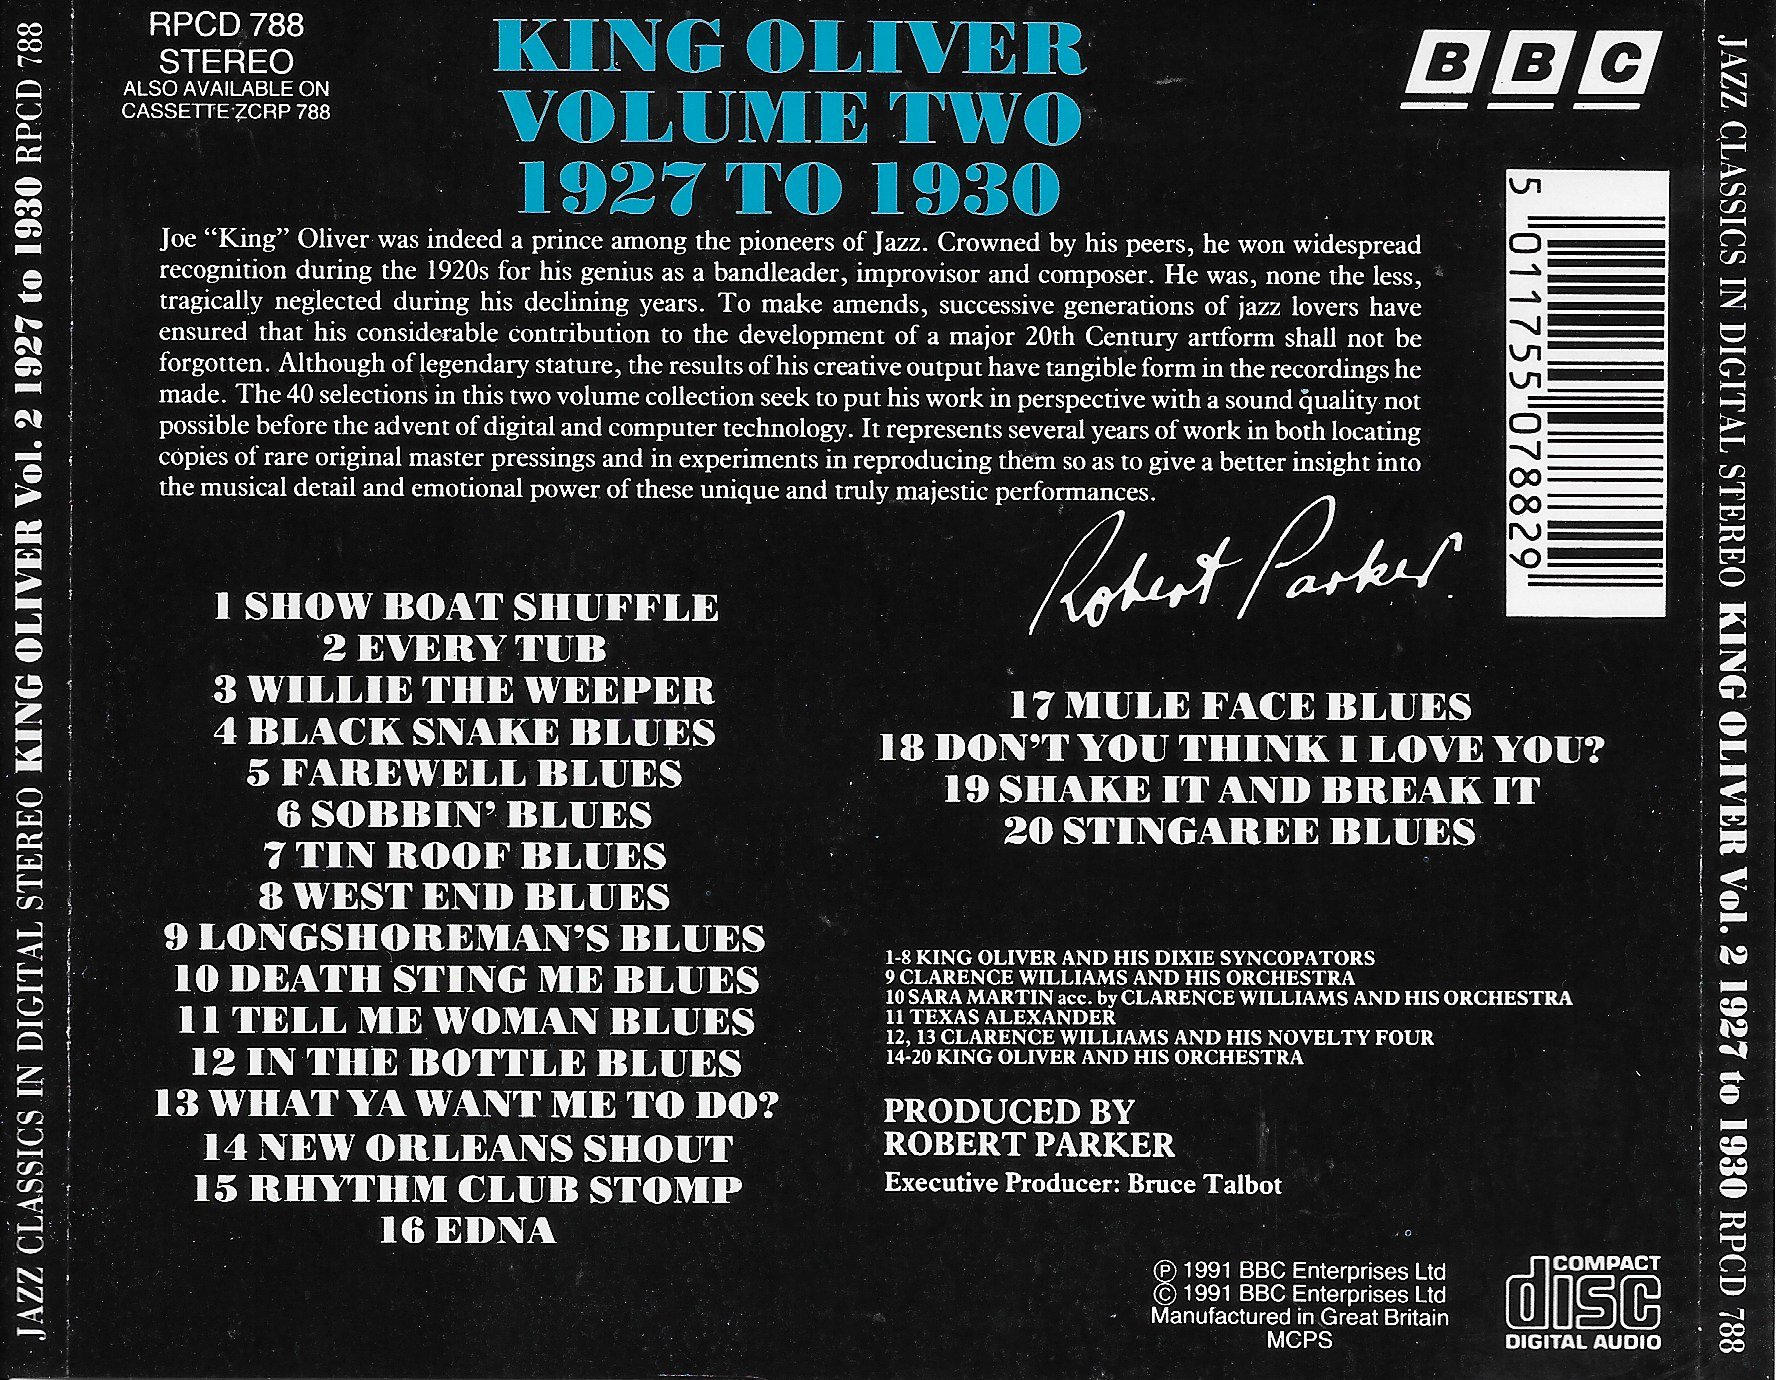 Back cover of RPCD 788